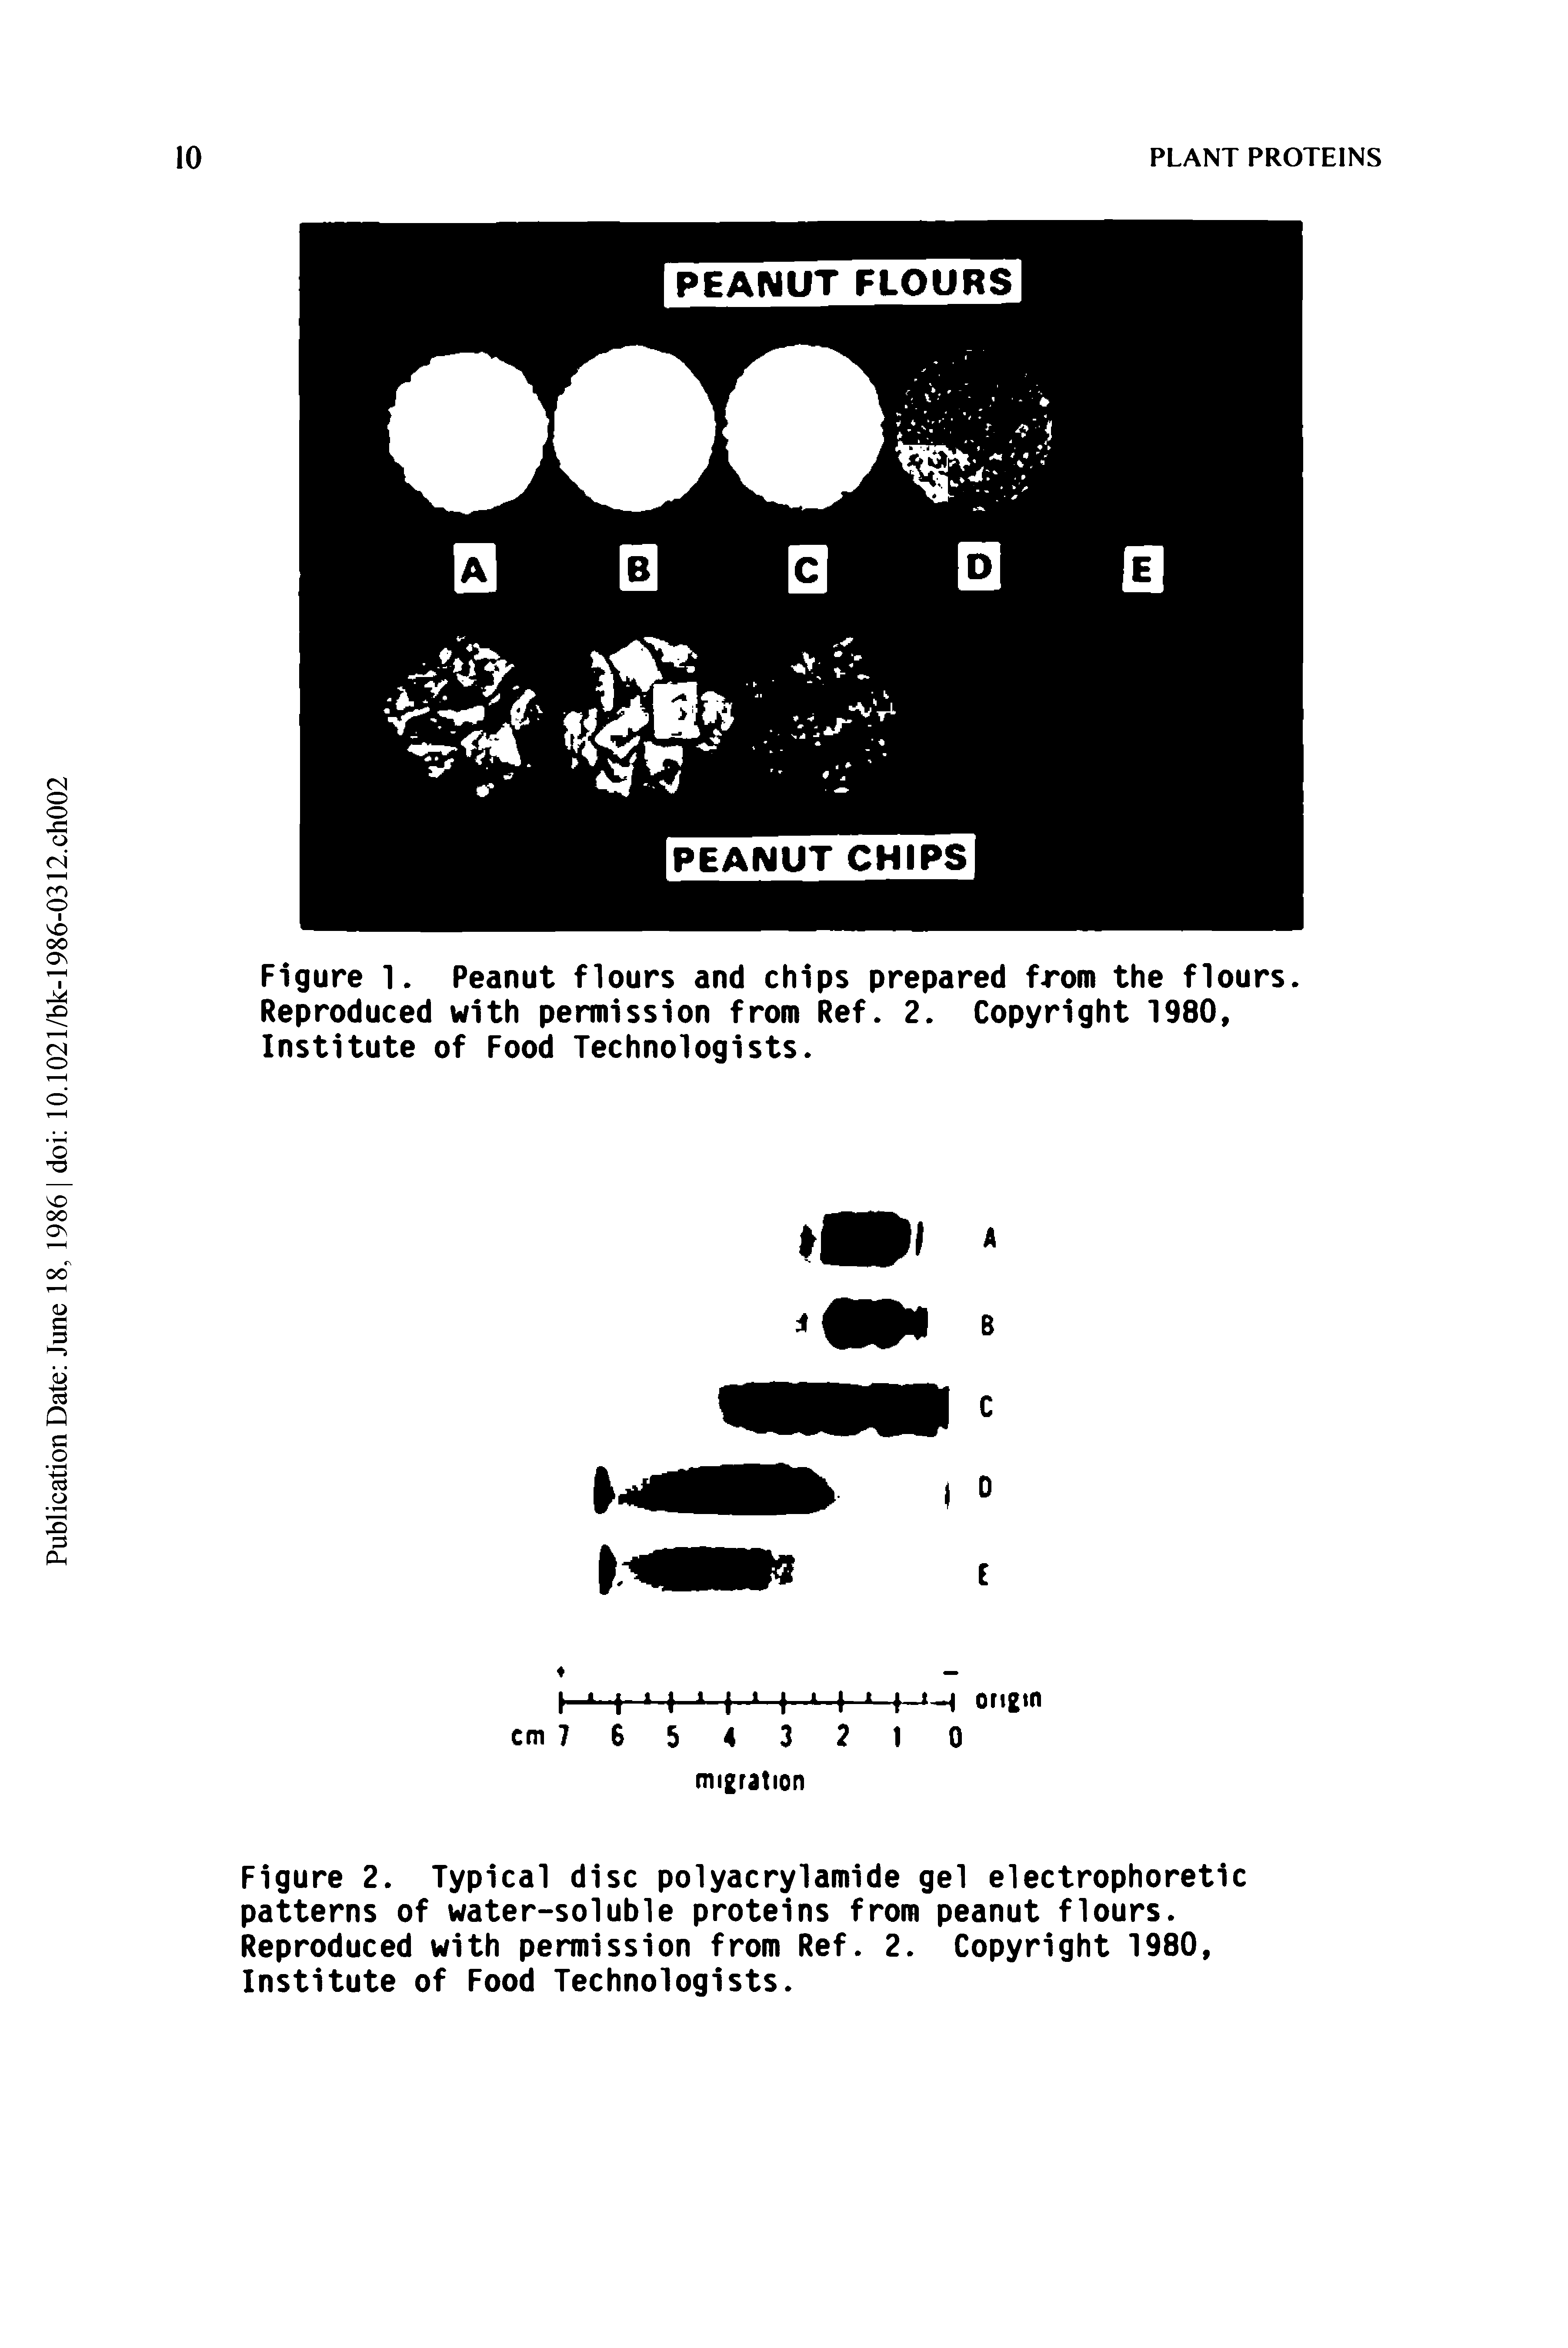 Figure 2. Typical disc polyacrylamide gel electrophoretic patterns of water-soluble proteins from peanut flours. Reproduced with permission from Ref. 2. Copyright 1980, Institute of Food Technologists.